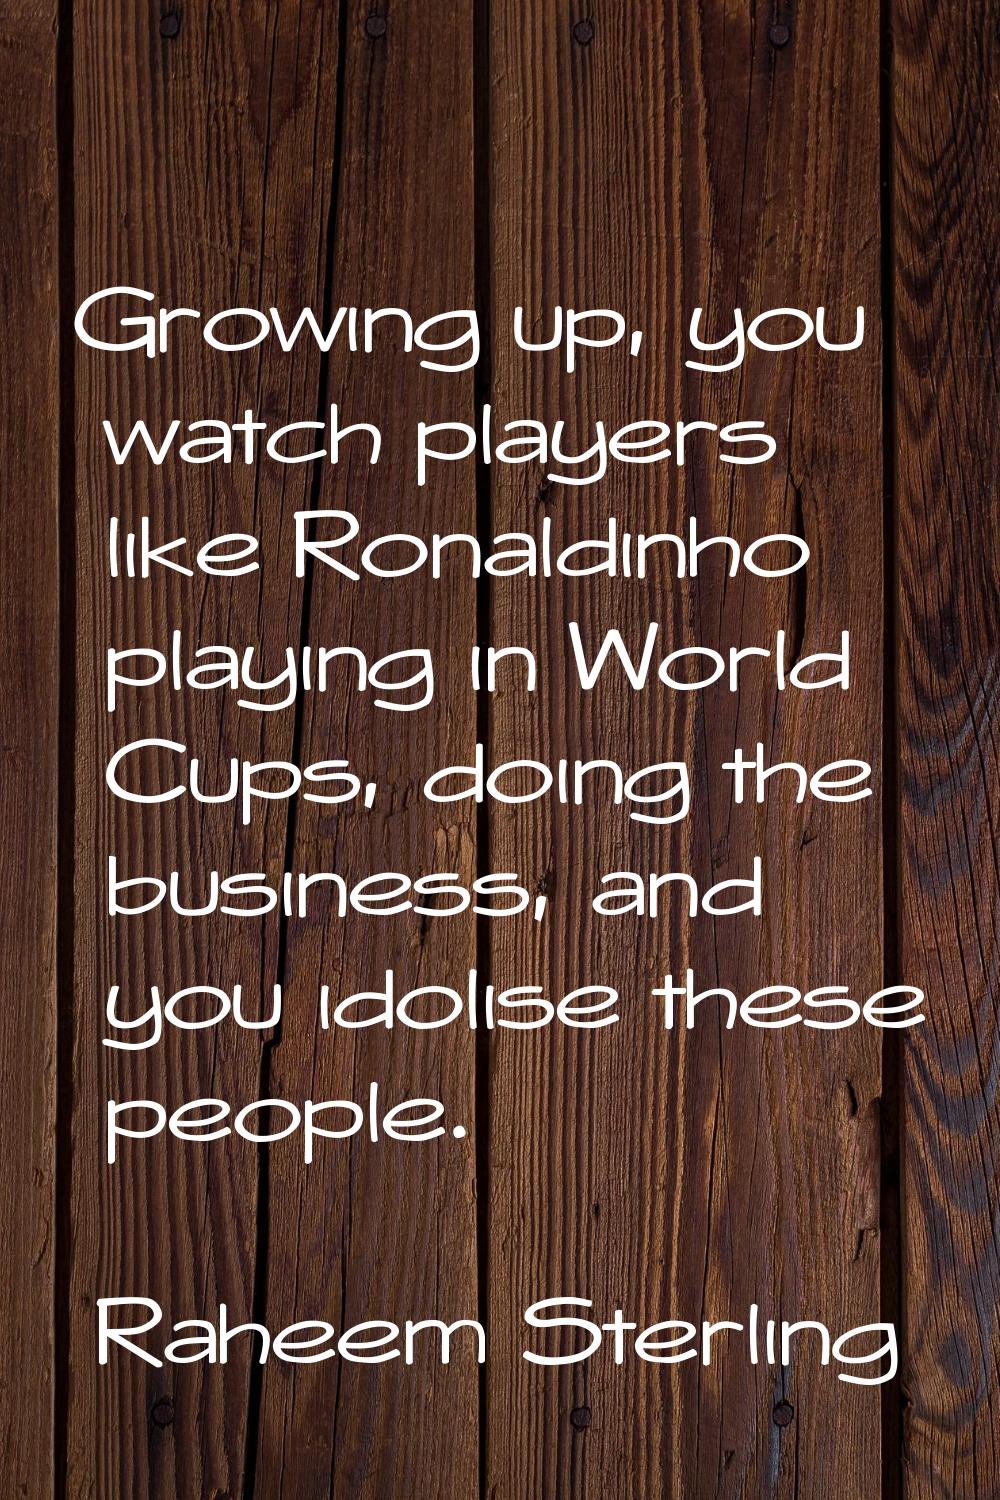 Growing up, you watch players like Ronaldinho playing in World Cups, doing the business, and you id